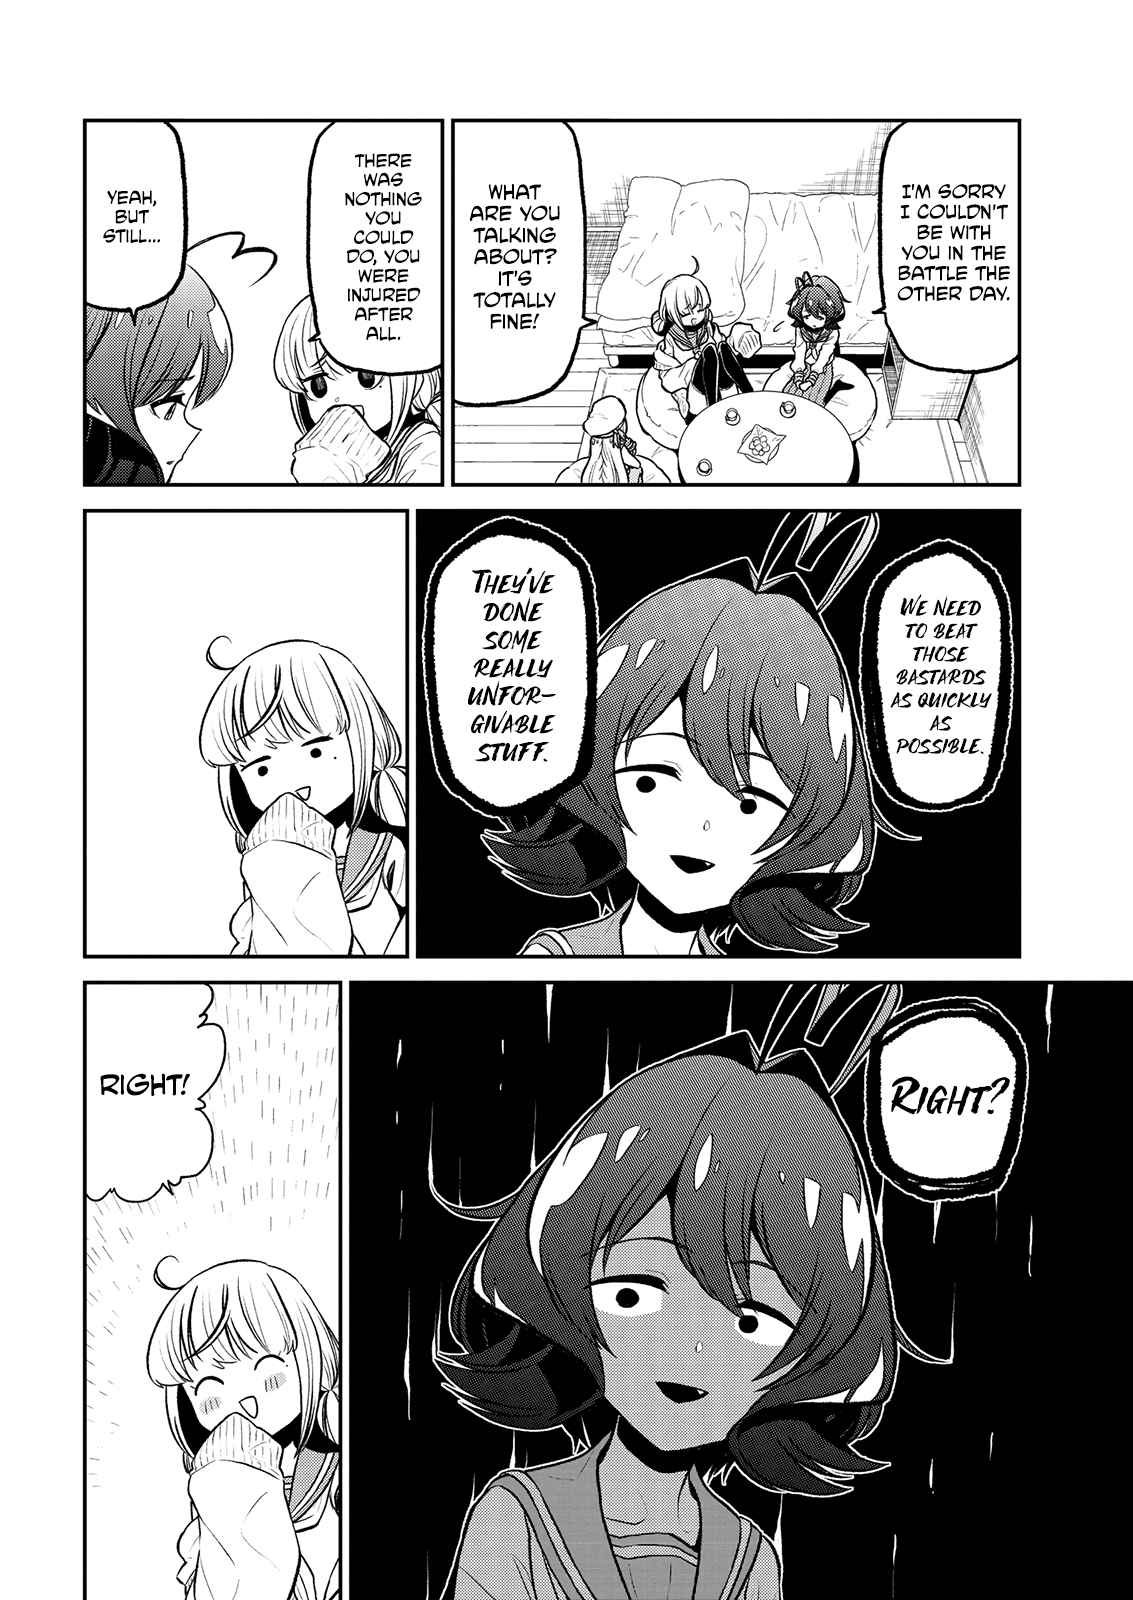 Looking up to Magical Girls Vol. 3 Ch. 14